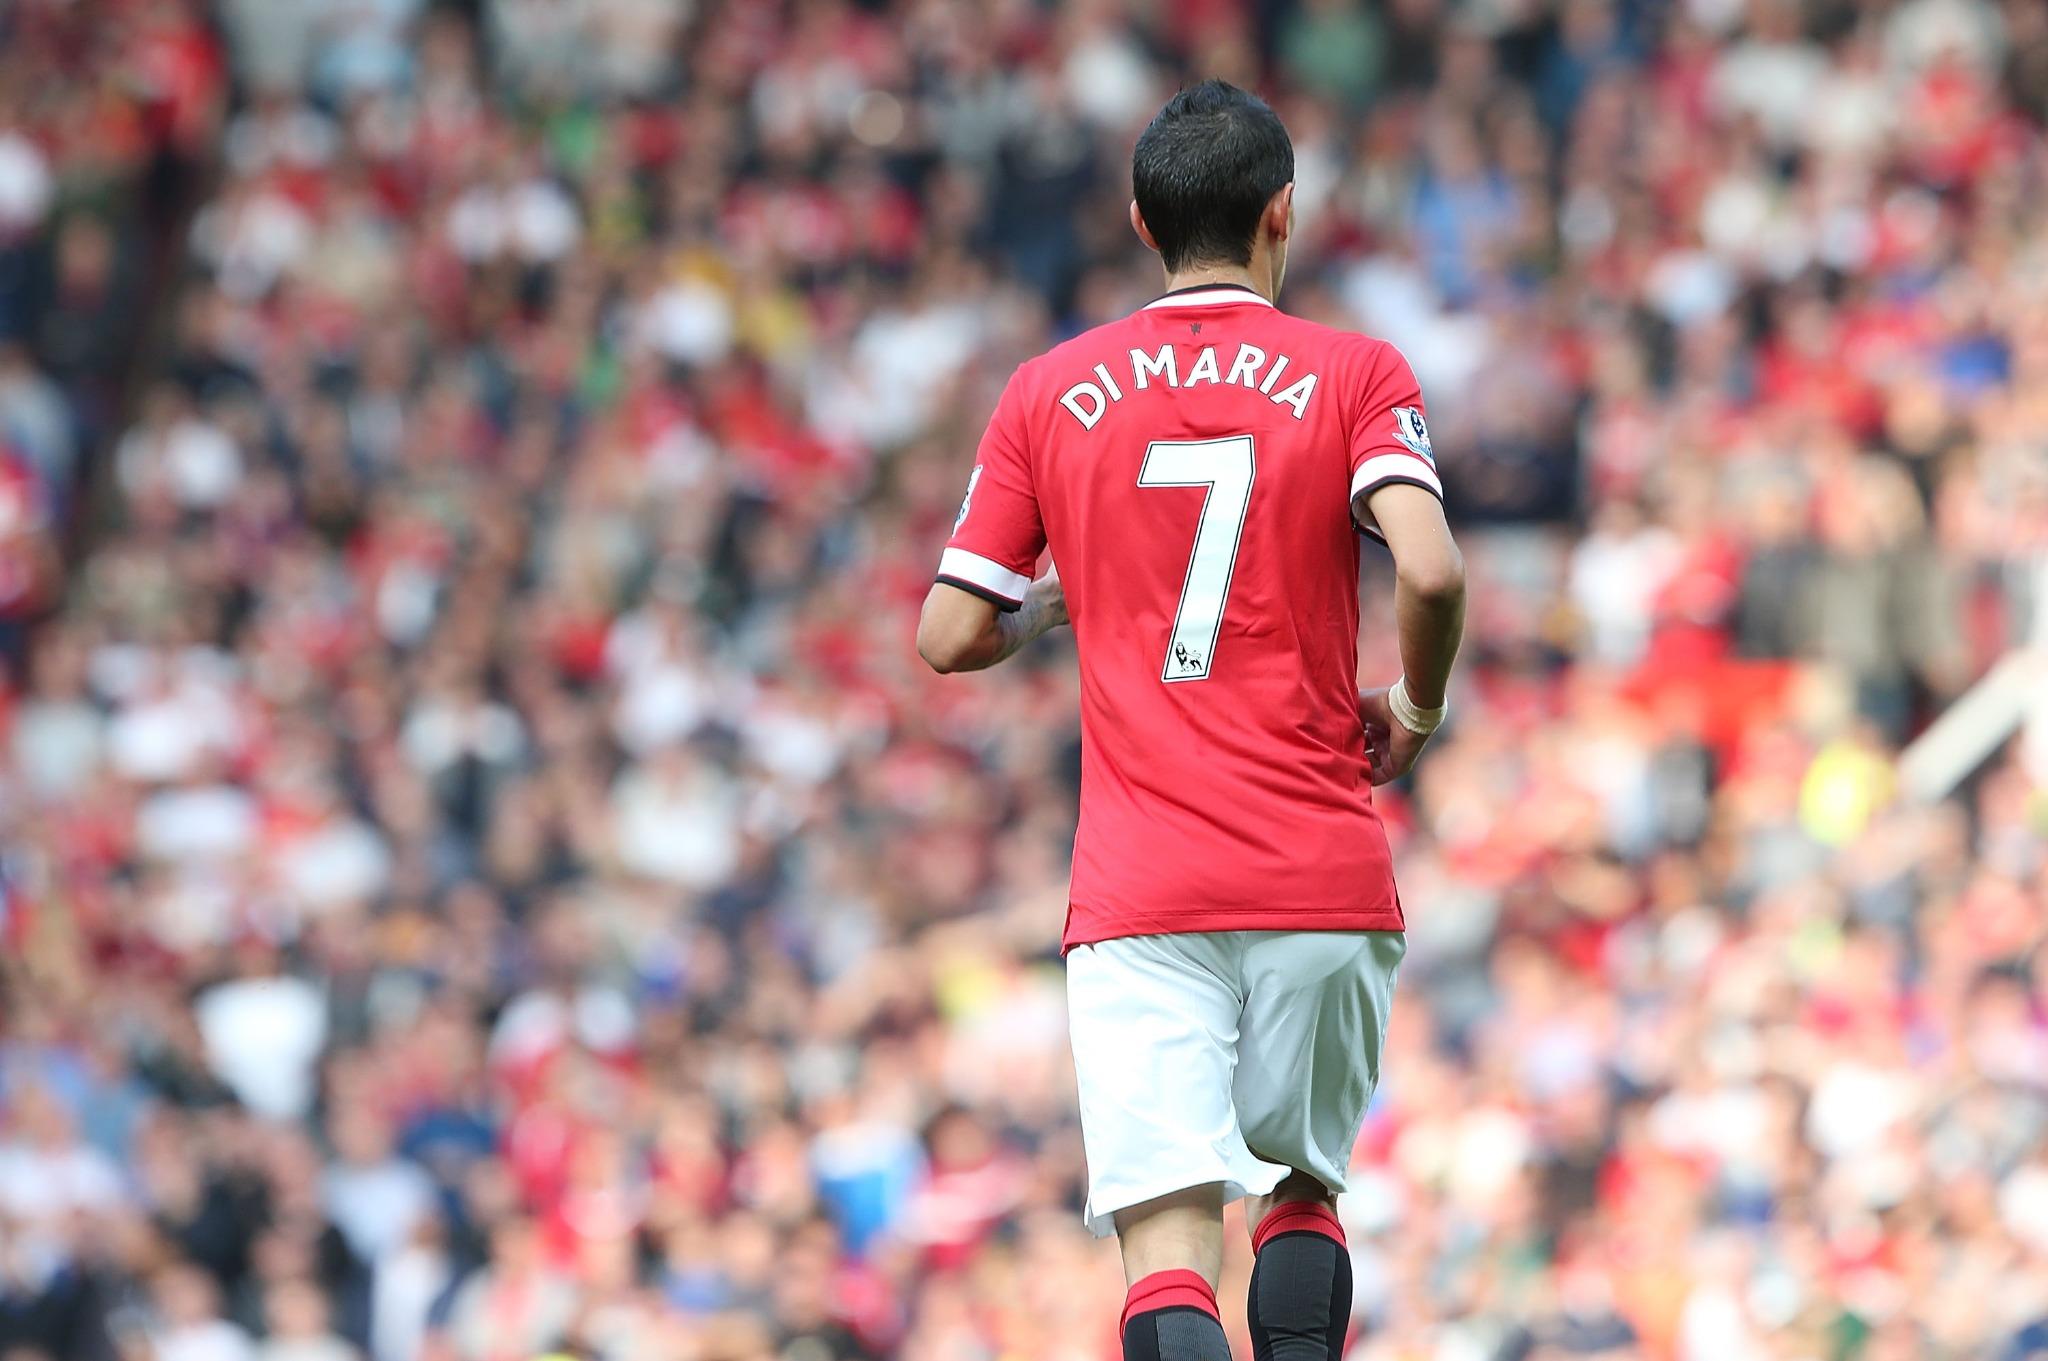 My problem at Manchester United wasn't number 7 but Louis van Gaal, asserts Angel Di Maria